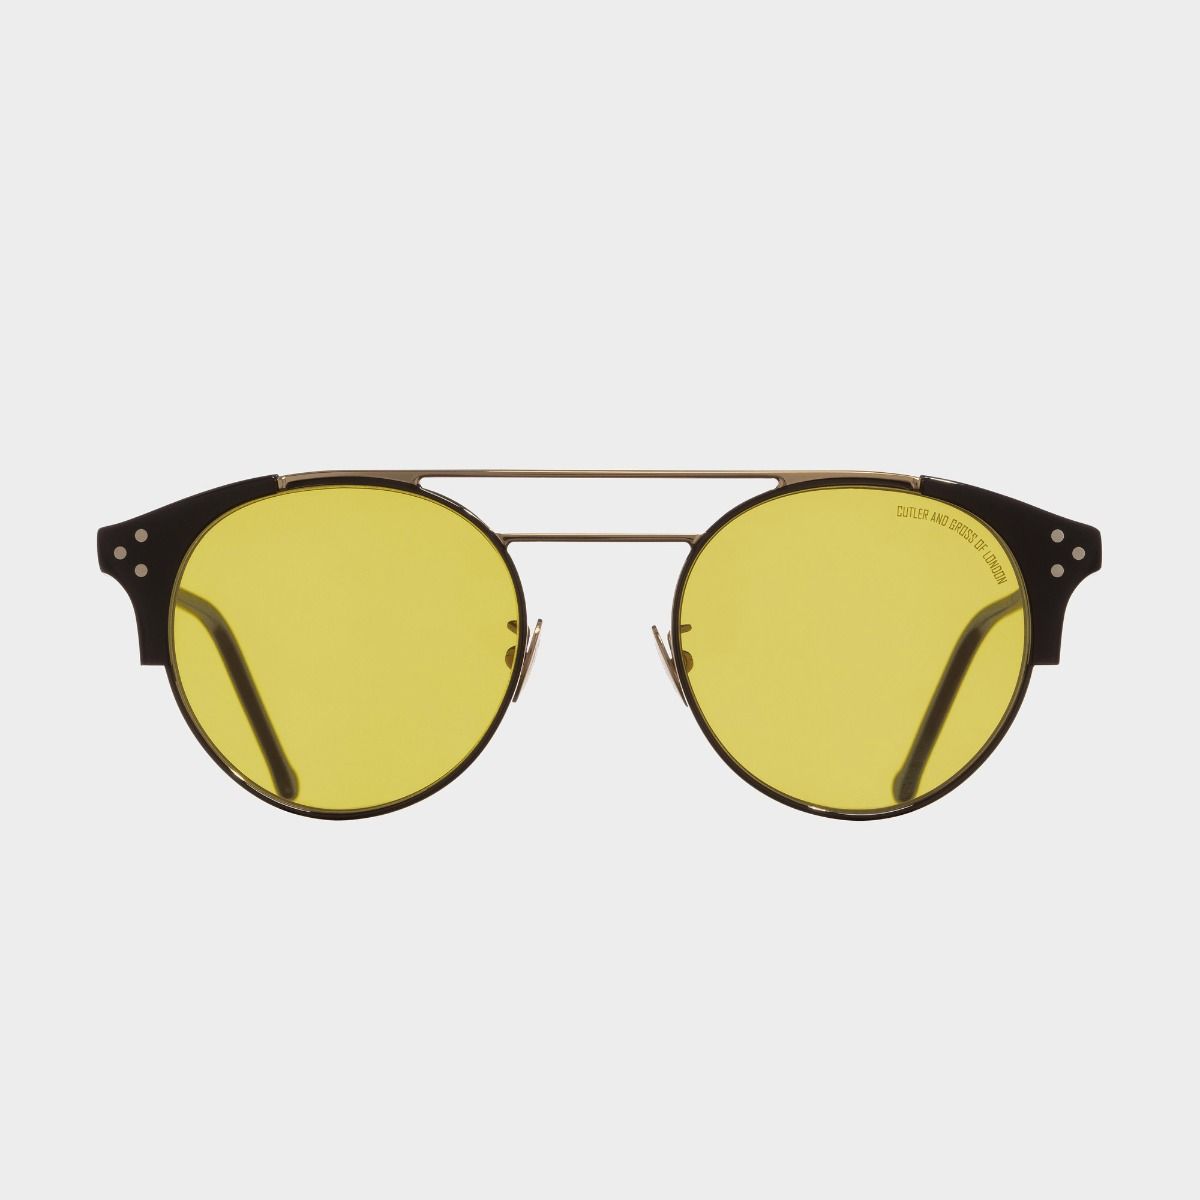 Cutler and Gross, 1271 Round Sunglasses - 06